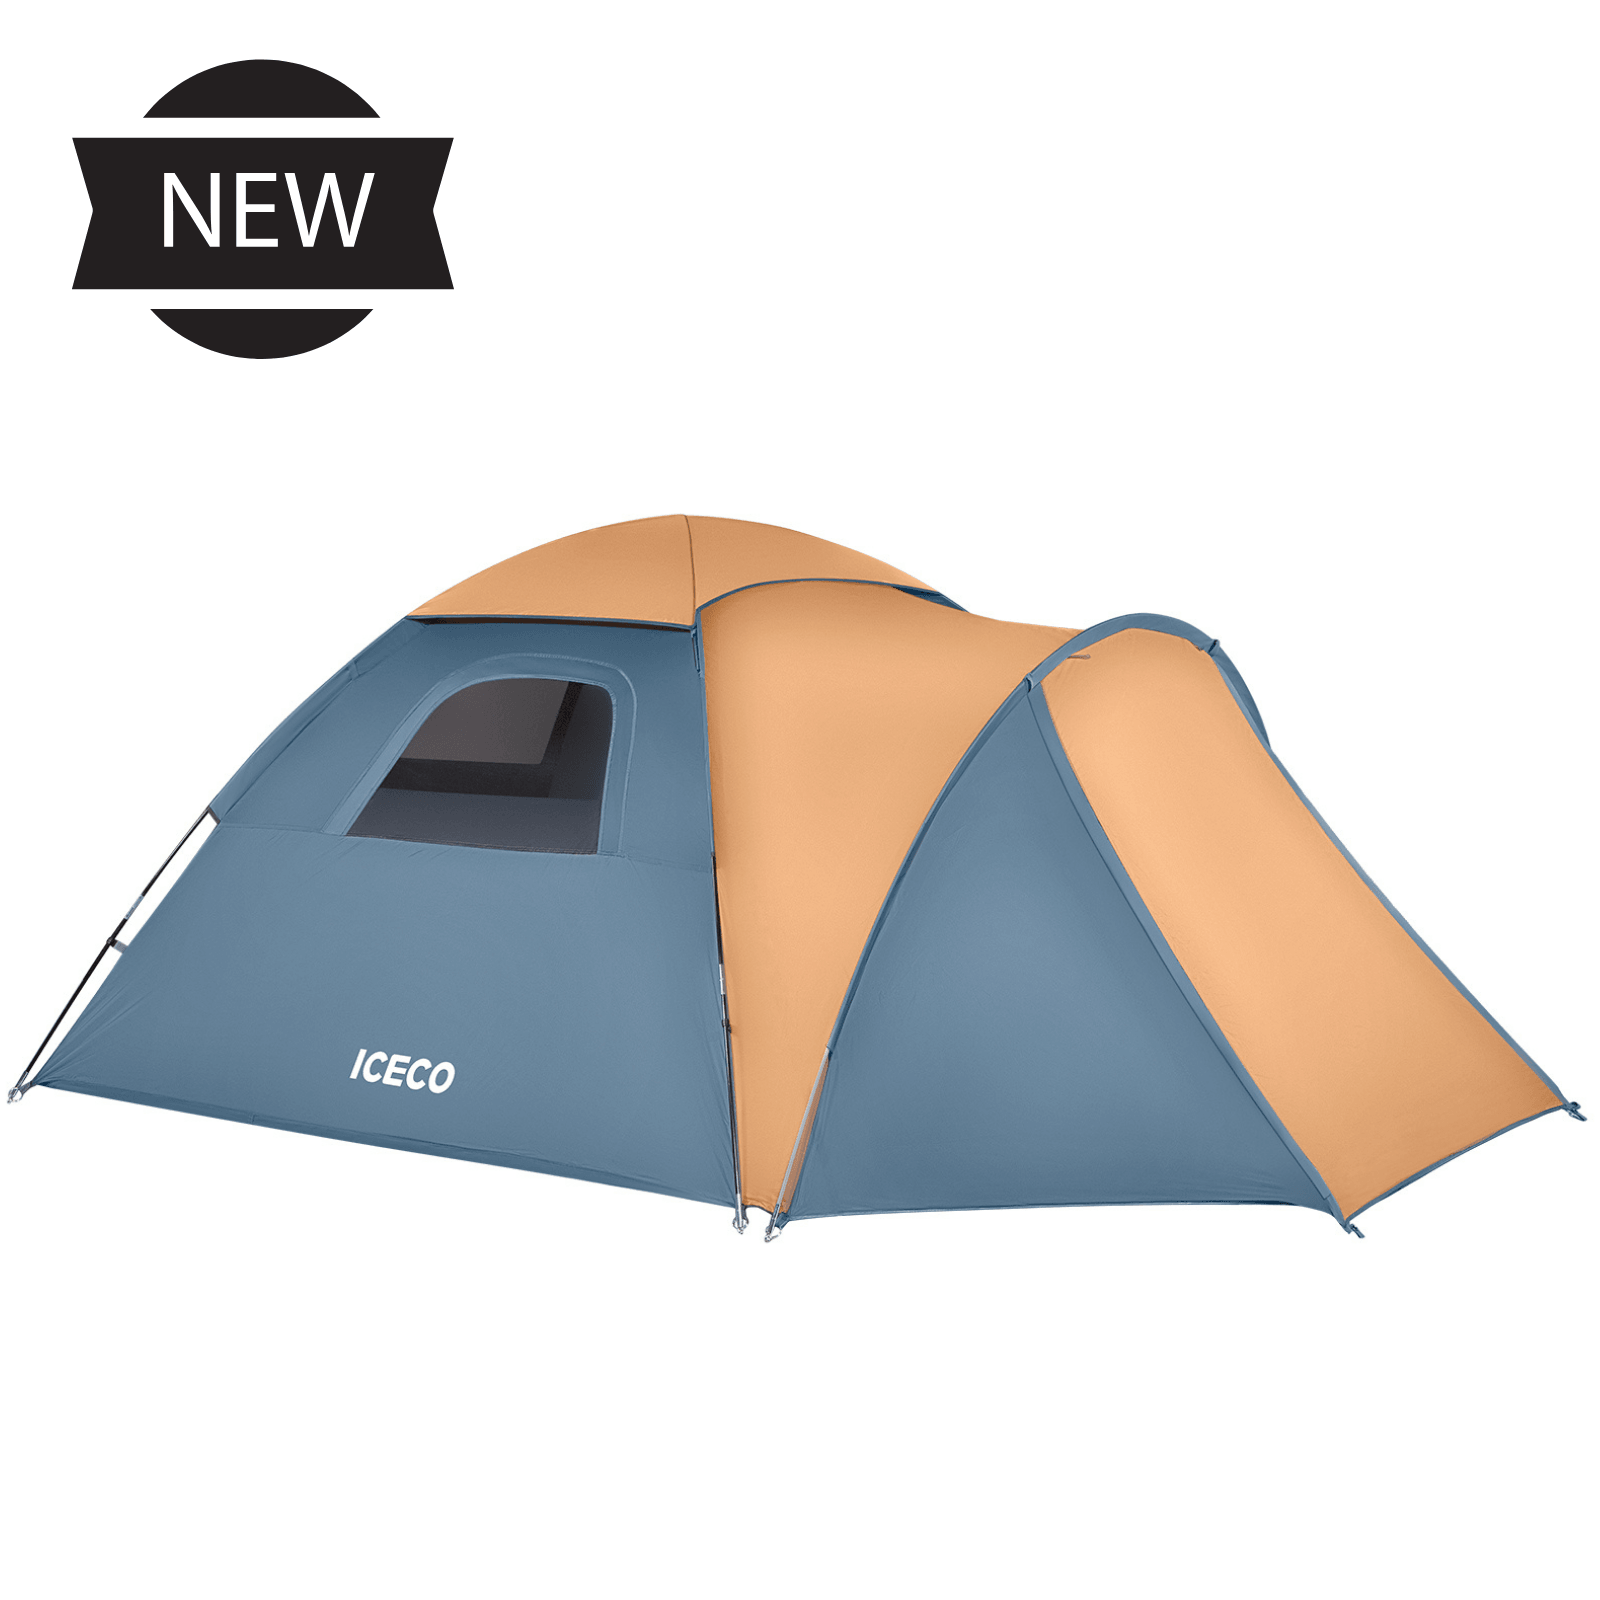 Deals ICECO 4 Person Camping Tent For All Season www.icecofreezer.com